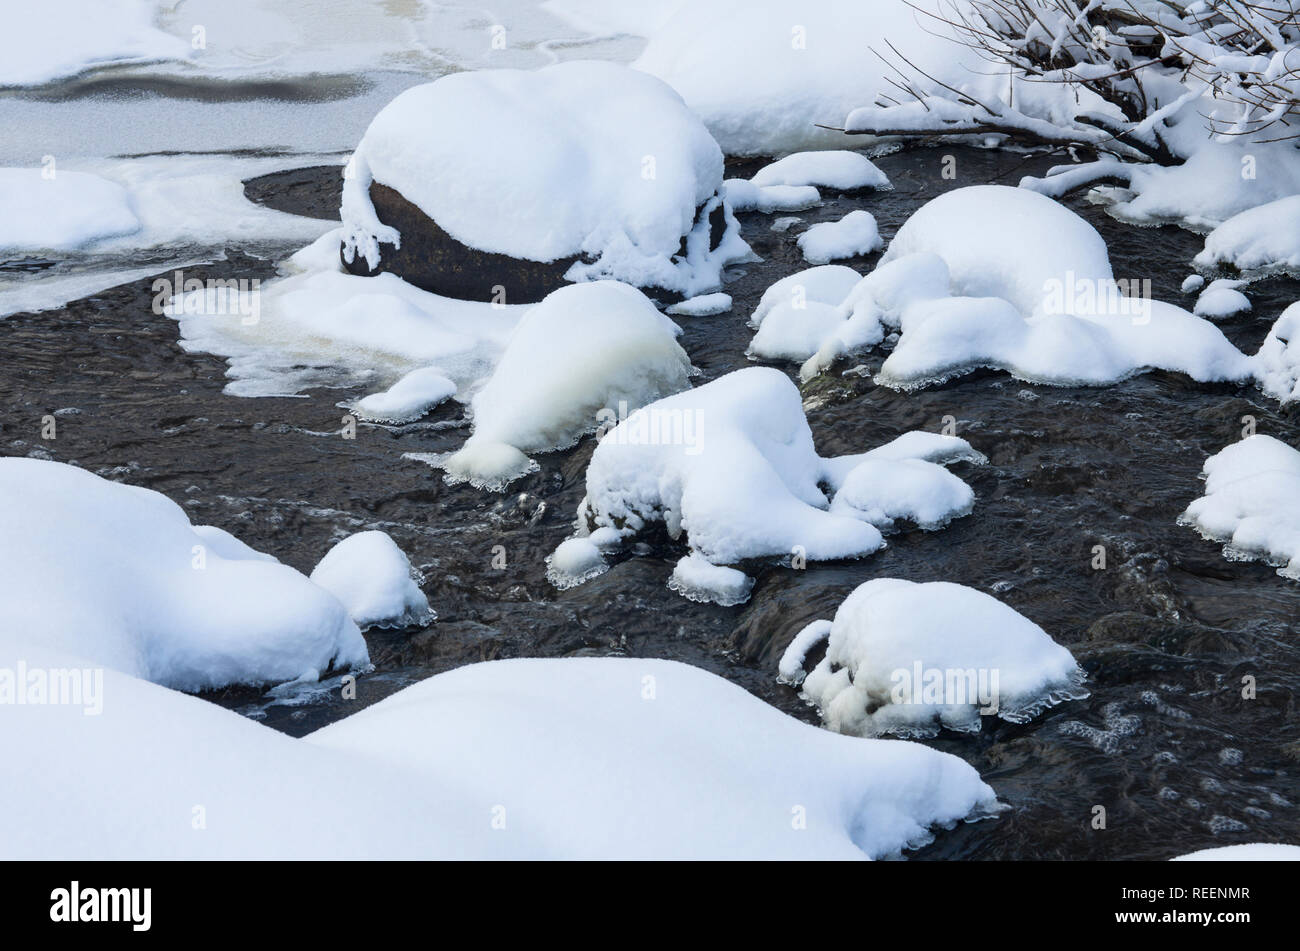 Snow-covered stones and banks with ice edge in the turbulent flow of the winter river on a cloudy day Stock Photo